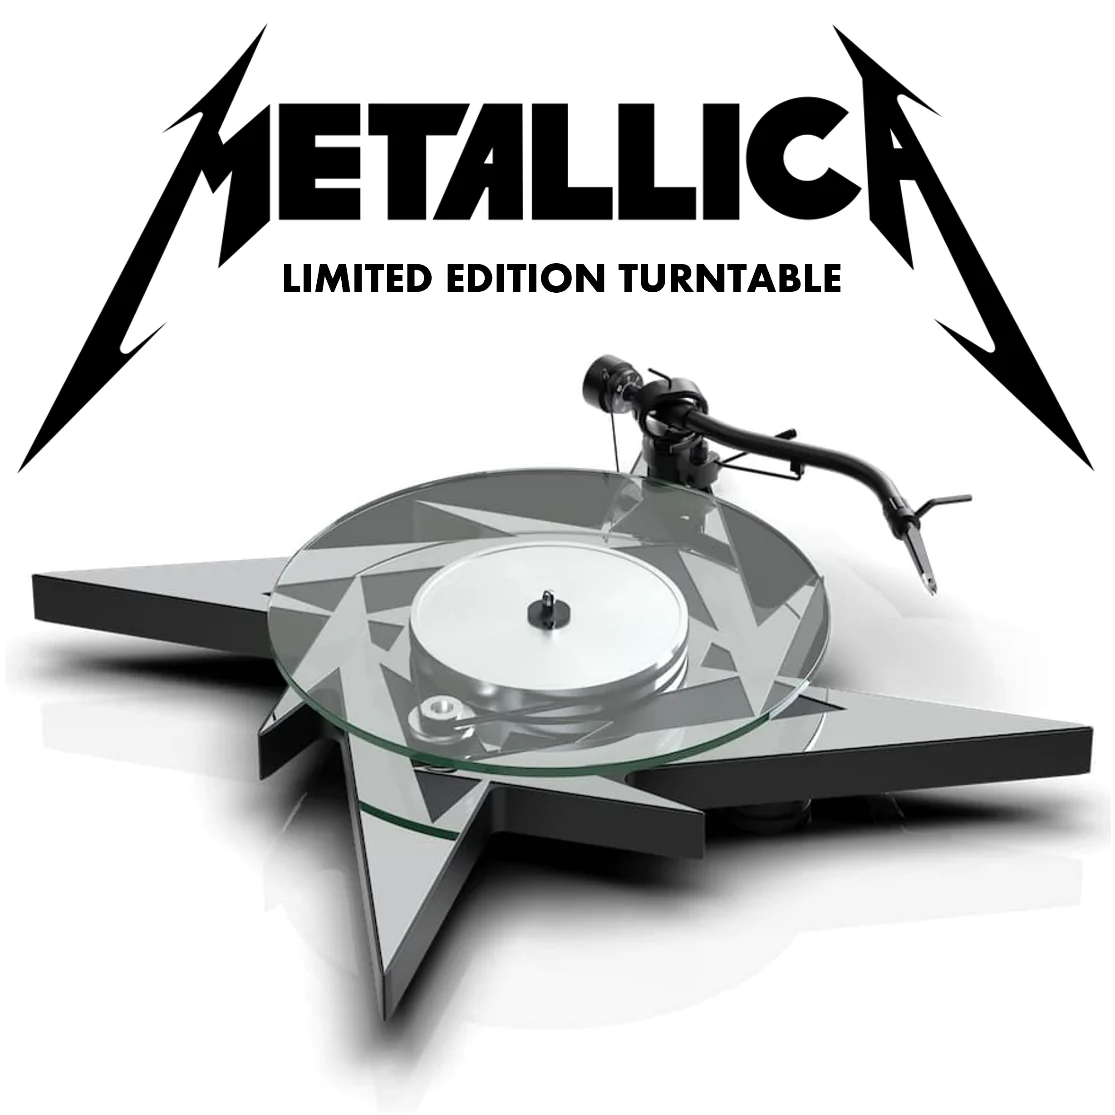 PRO-JECT METALLİCA LİMİTED EDİTİON  resmi